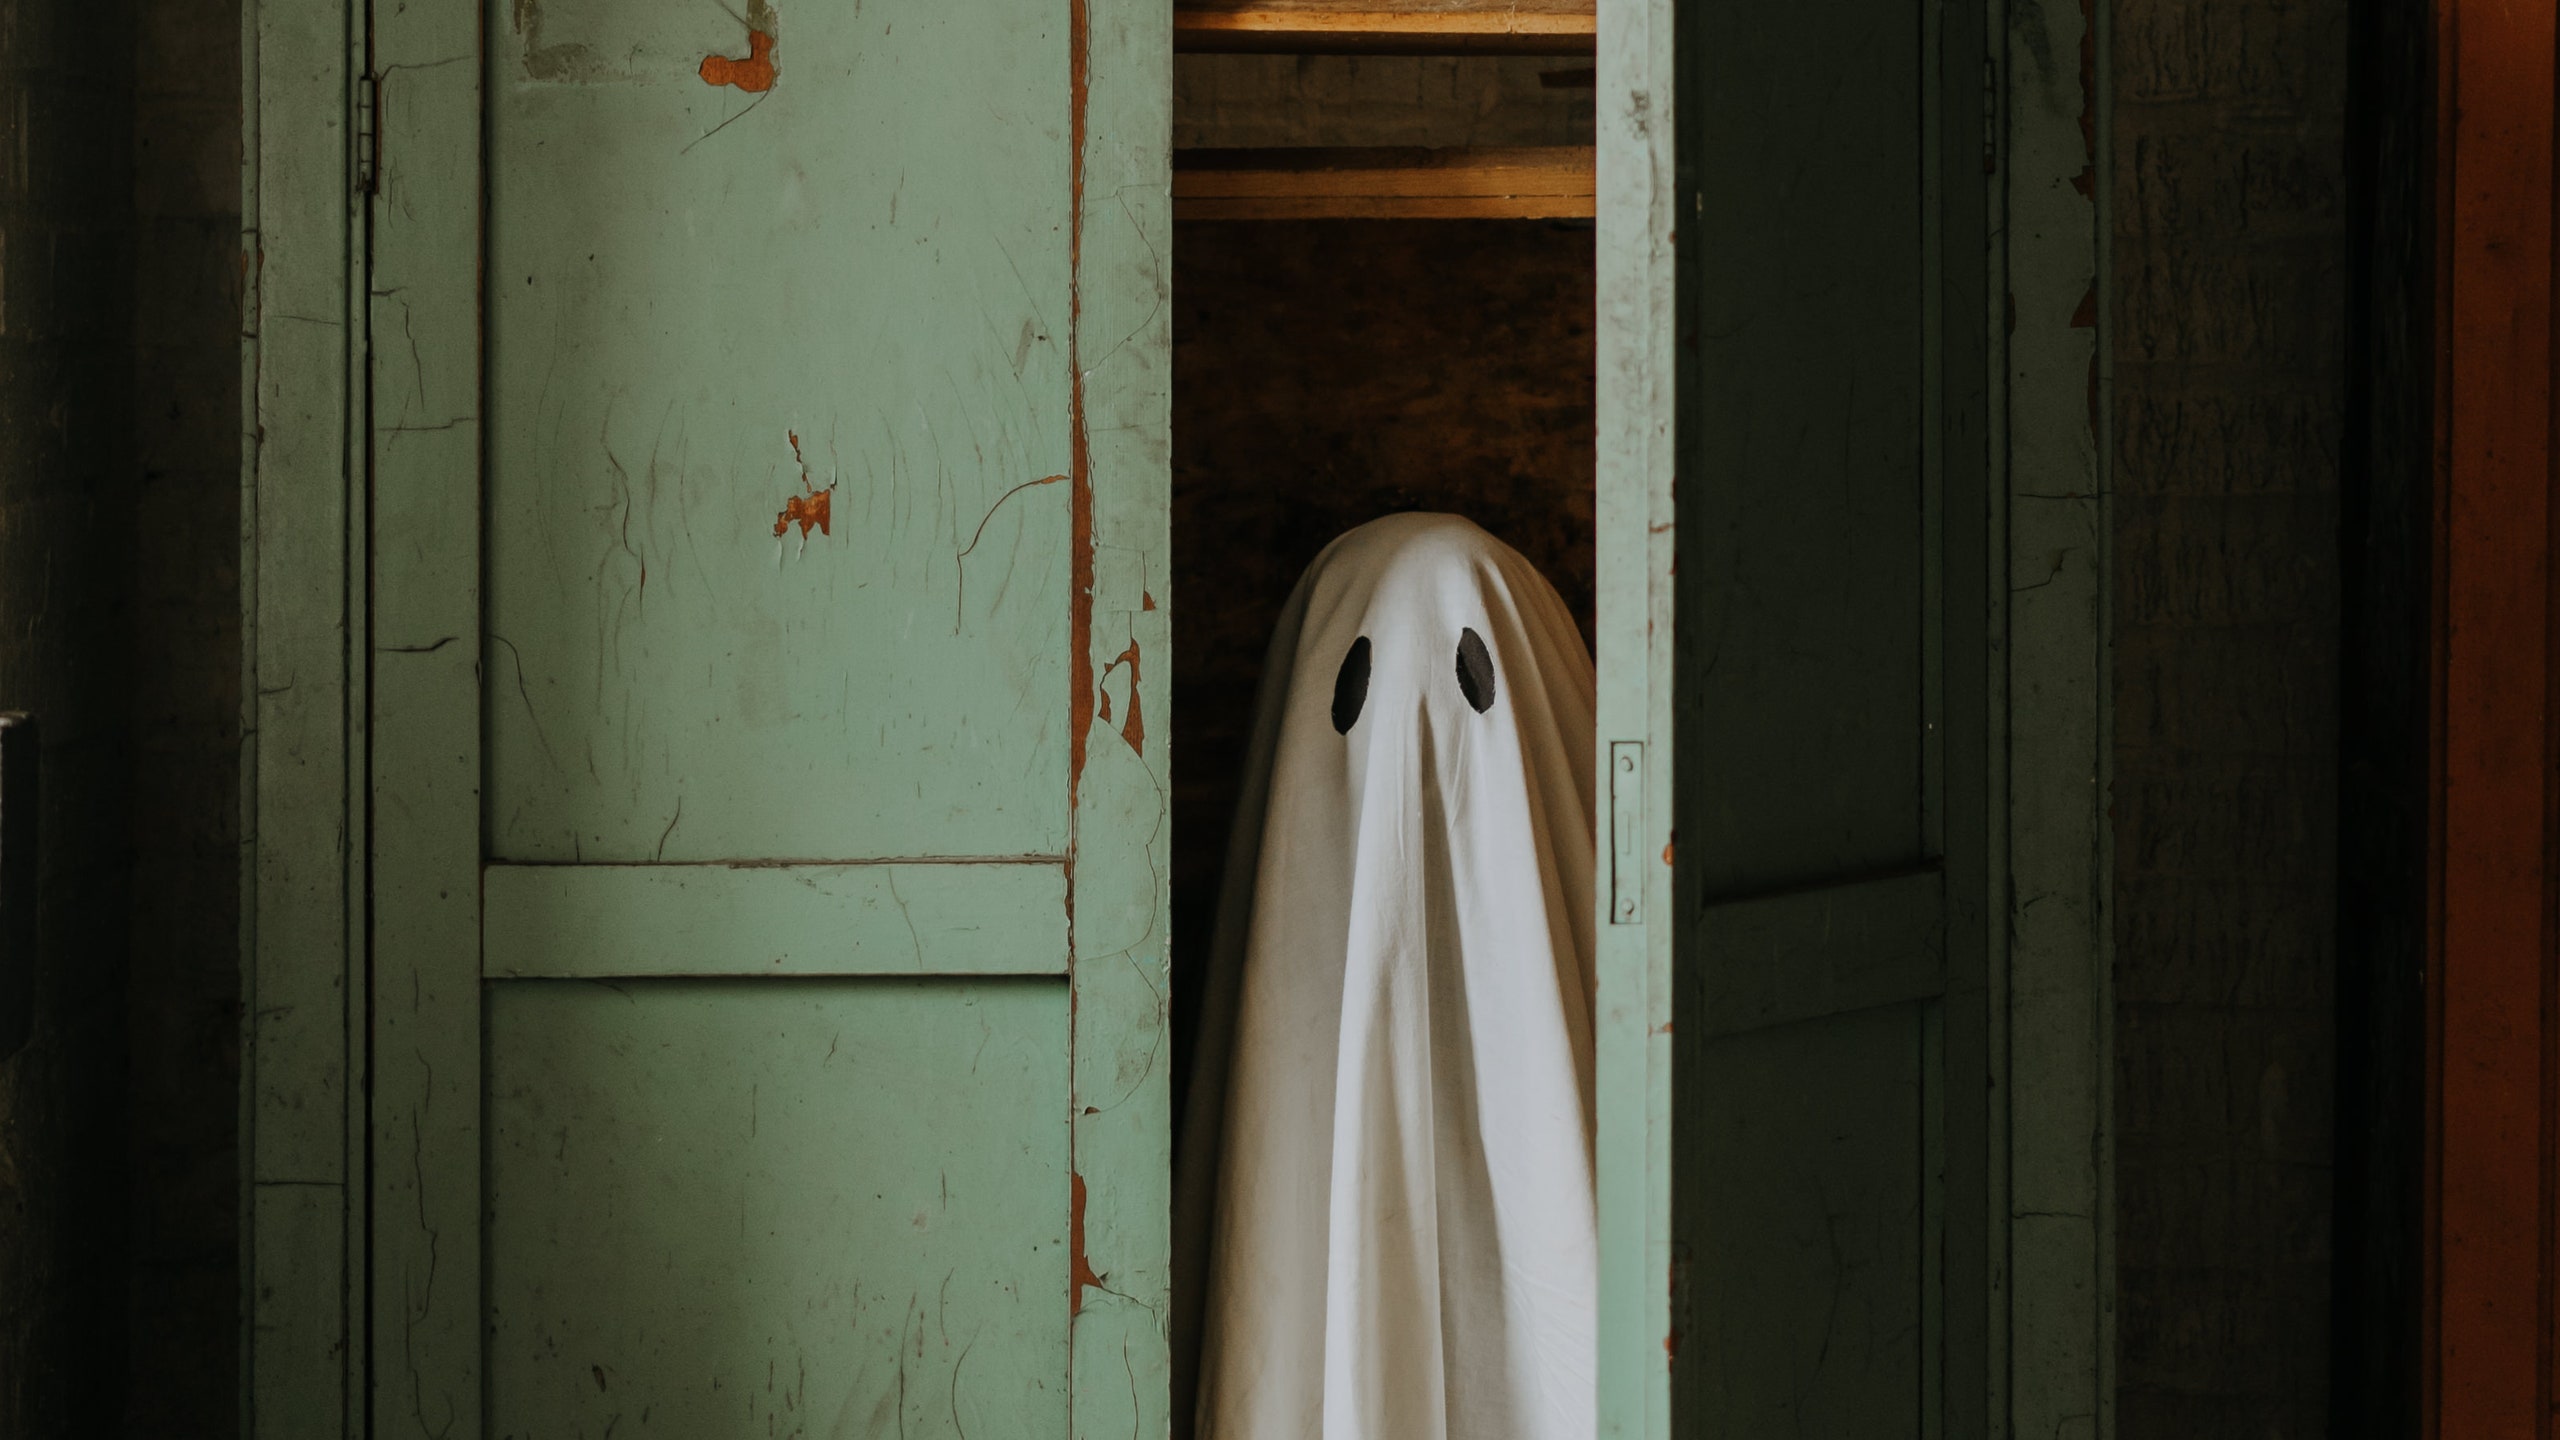 Hunting for Ghosts on Halloween